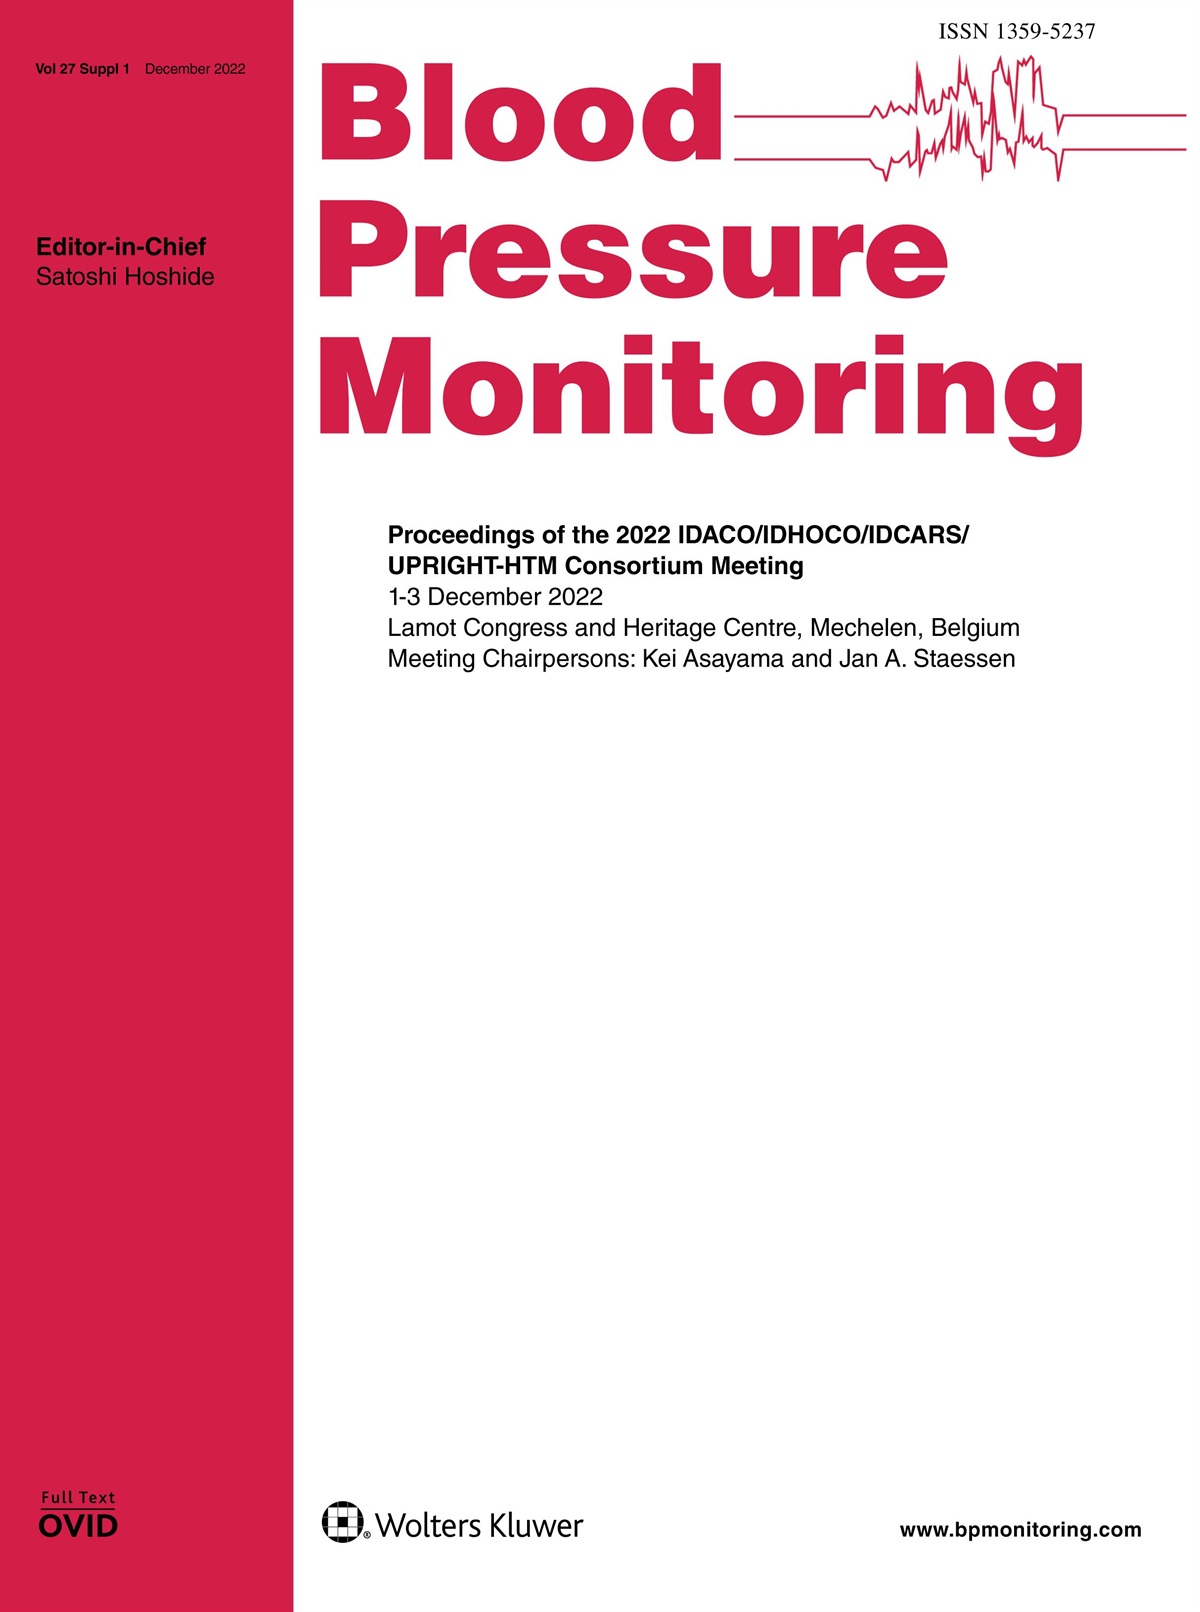 Opportunities for improving hypertension control in sub-Saharan Africa